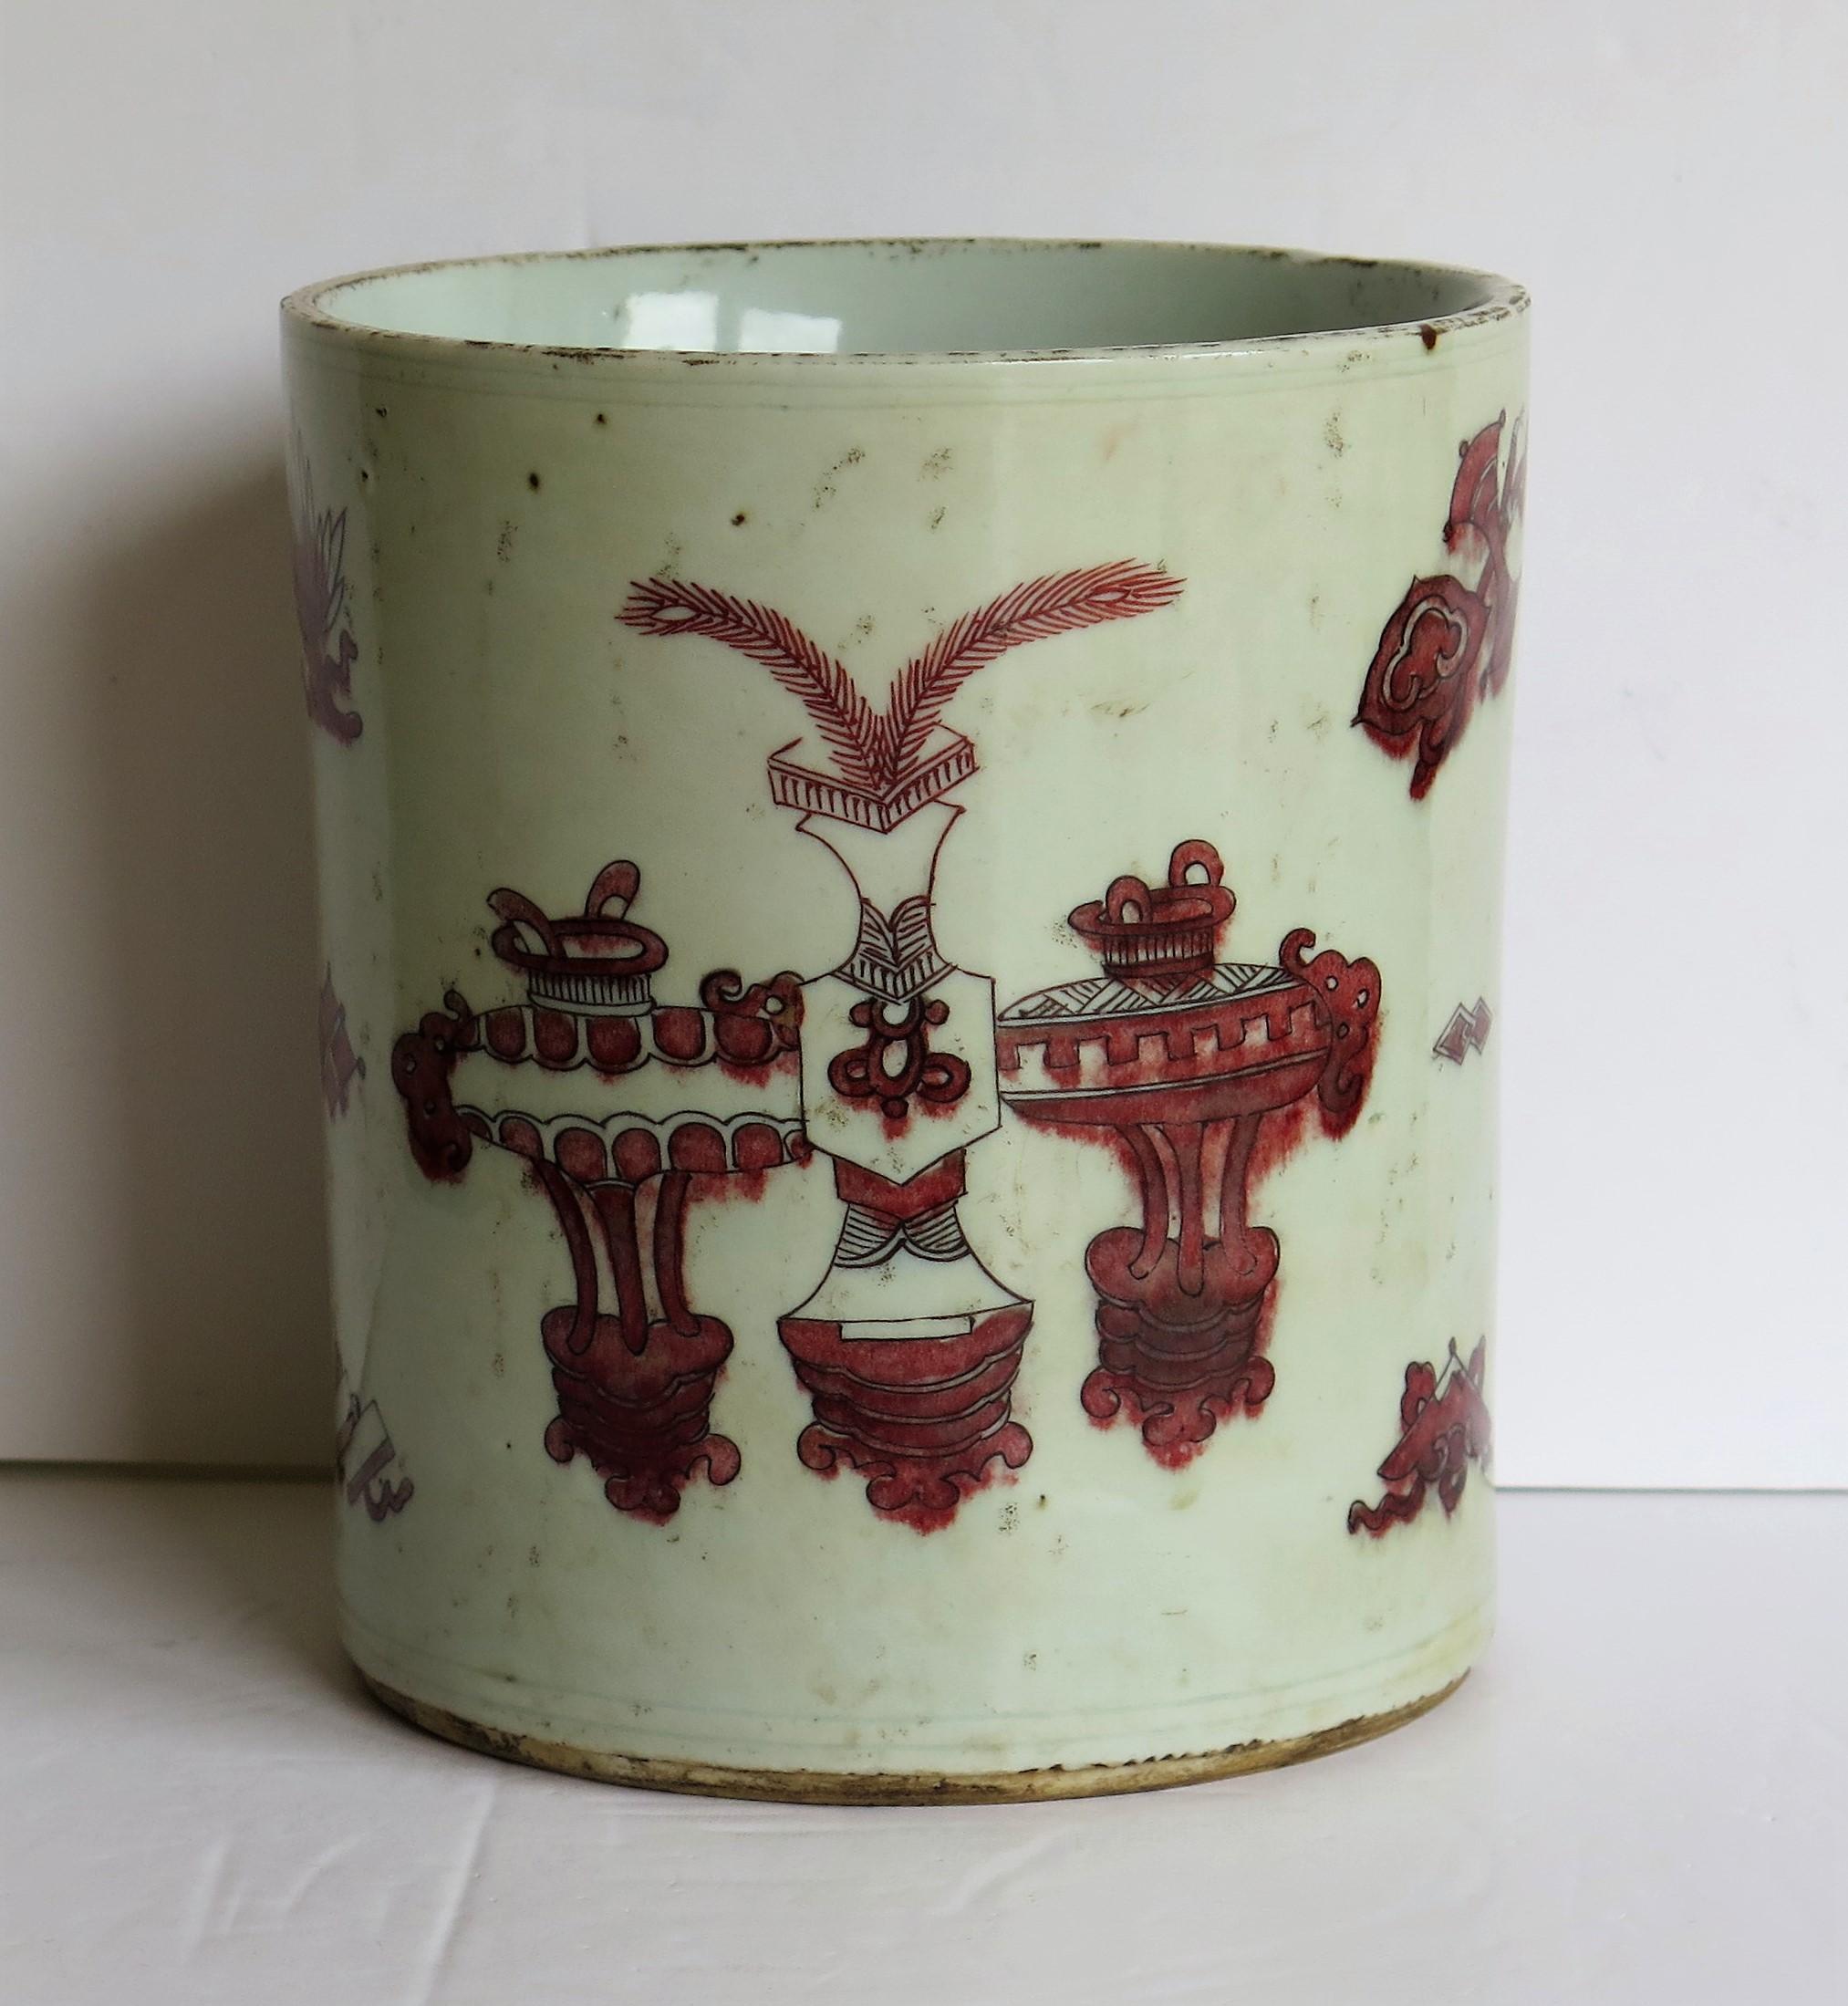 This is a very good Chinese porcelain Brush Pot or Bitong hand painted, under-glaze, in red / red-brown enamels with antiques, incense burners, precious things and other motifs and symbols, which we date to the 18th century, Qing period.

This piece